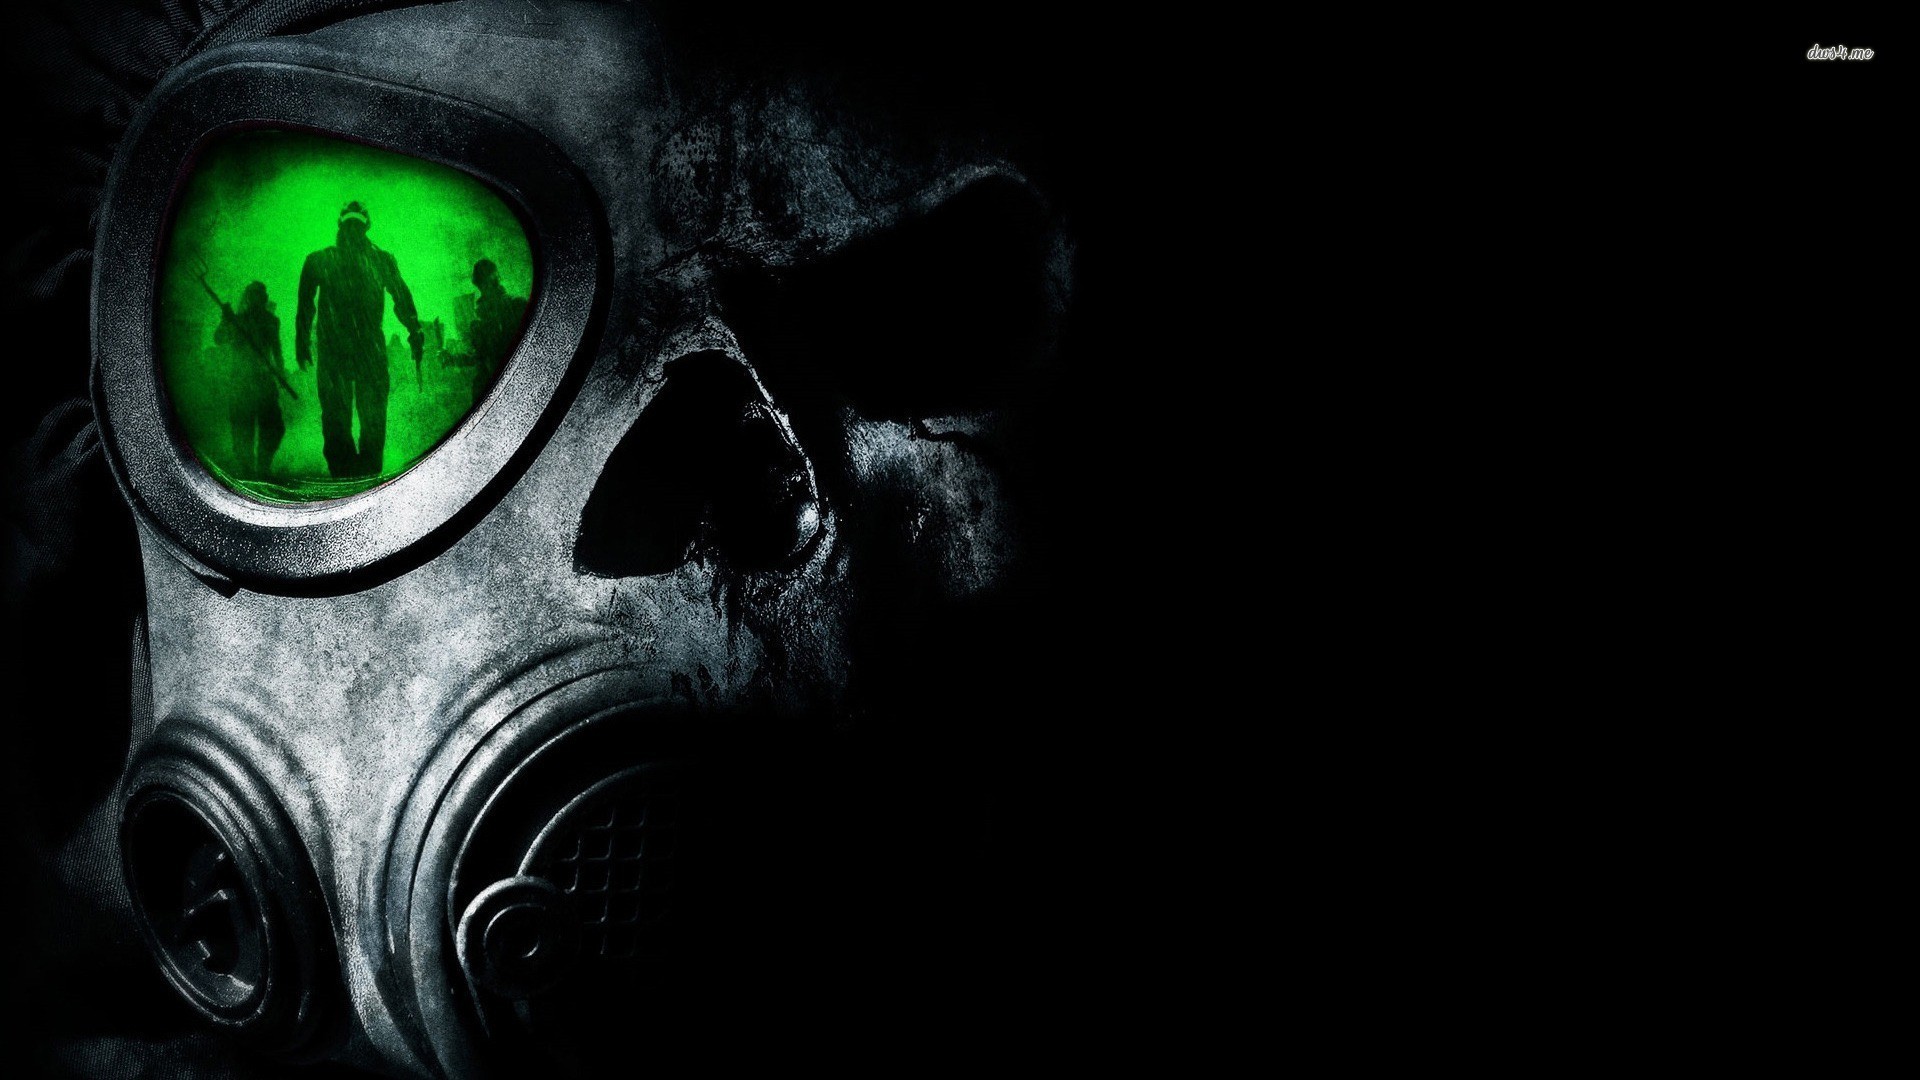 Gas Mask wallpaper ·① Download free HD backgrounds for desktop, mobile, laptop in any resolution ...